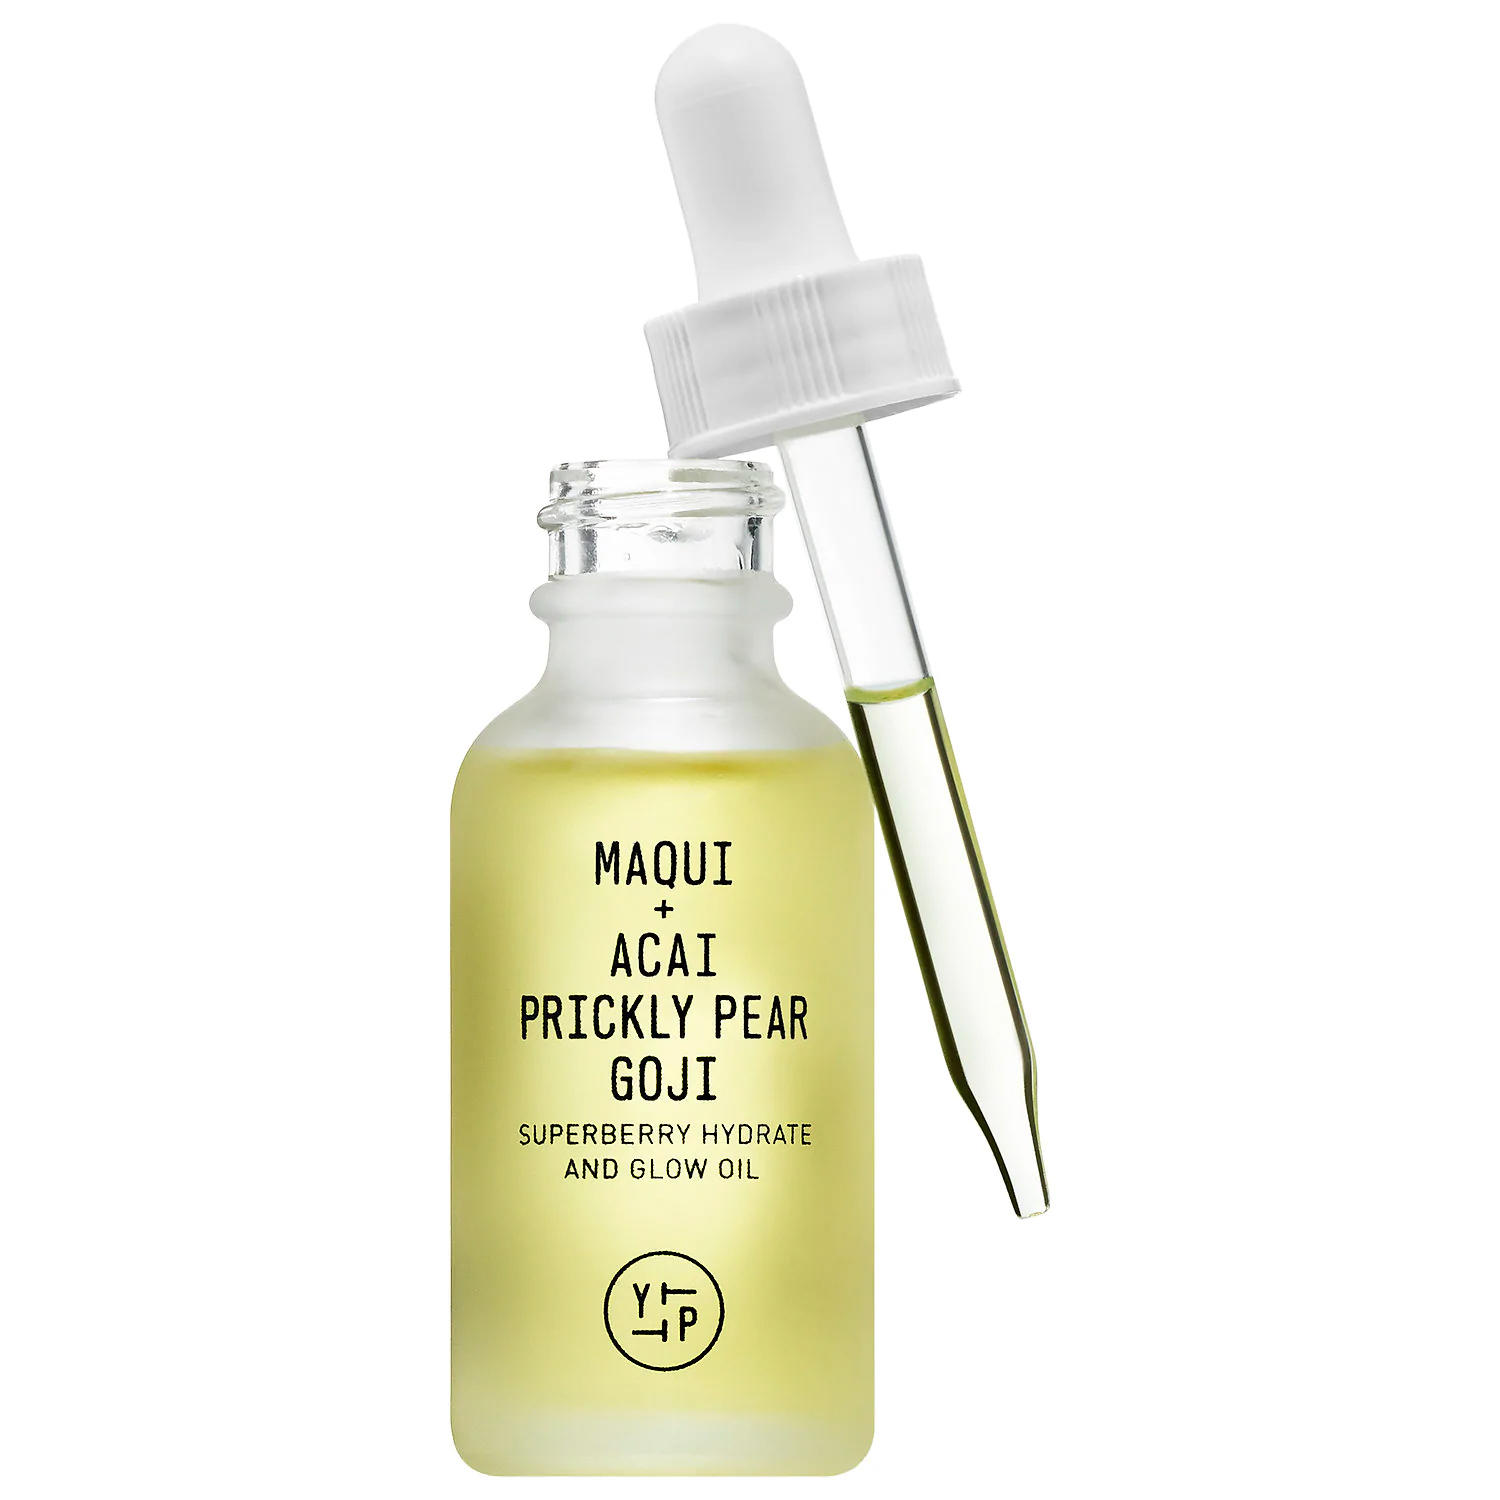 Youth To The People Superberry Hydrate + Glow Oil Mini